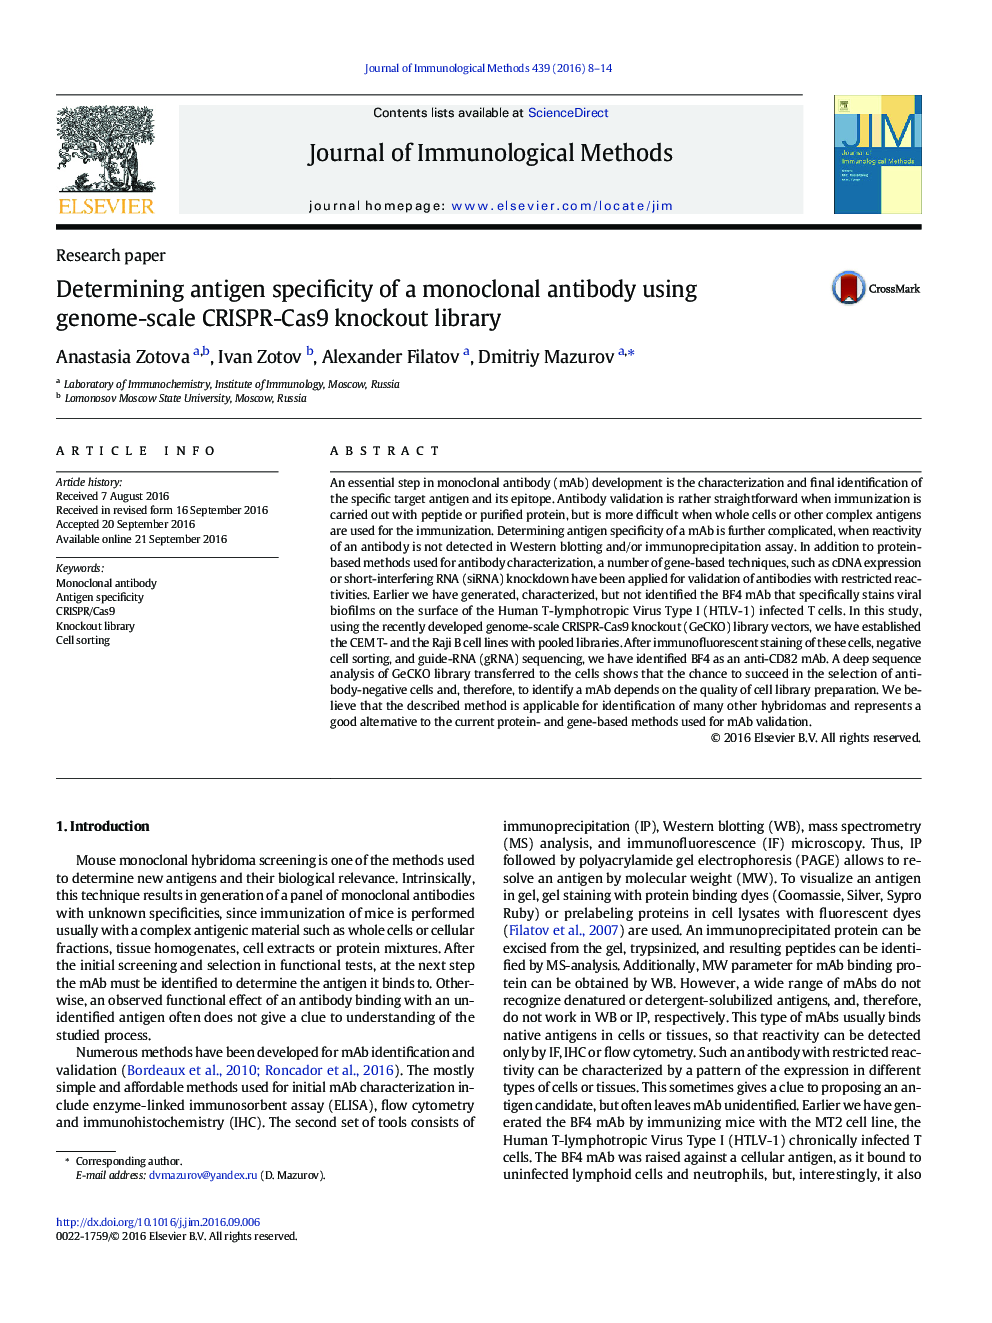 Research paperDetermining antigen specificity of a monoclonal antibody using genome-scale CRISPR-Cas9 knockout library